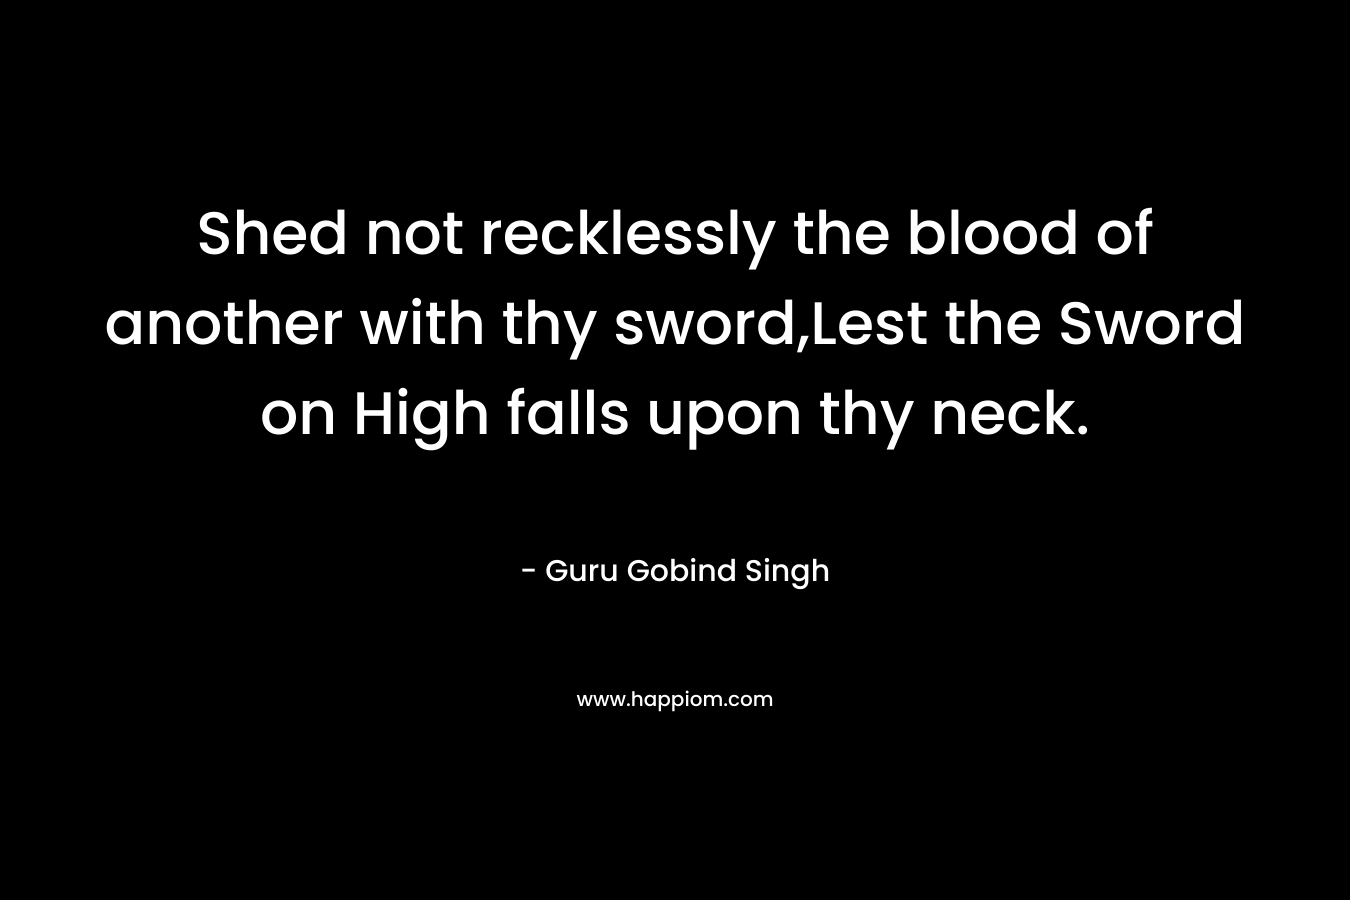 Shed not recklessly the blood of another with thy sword,Lest the Sword on High falls upon thy neck.